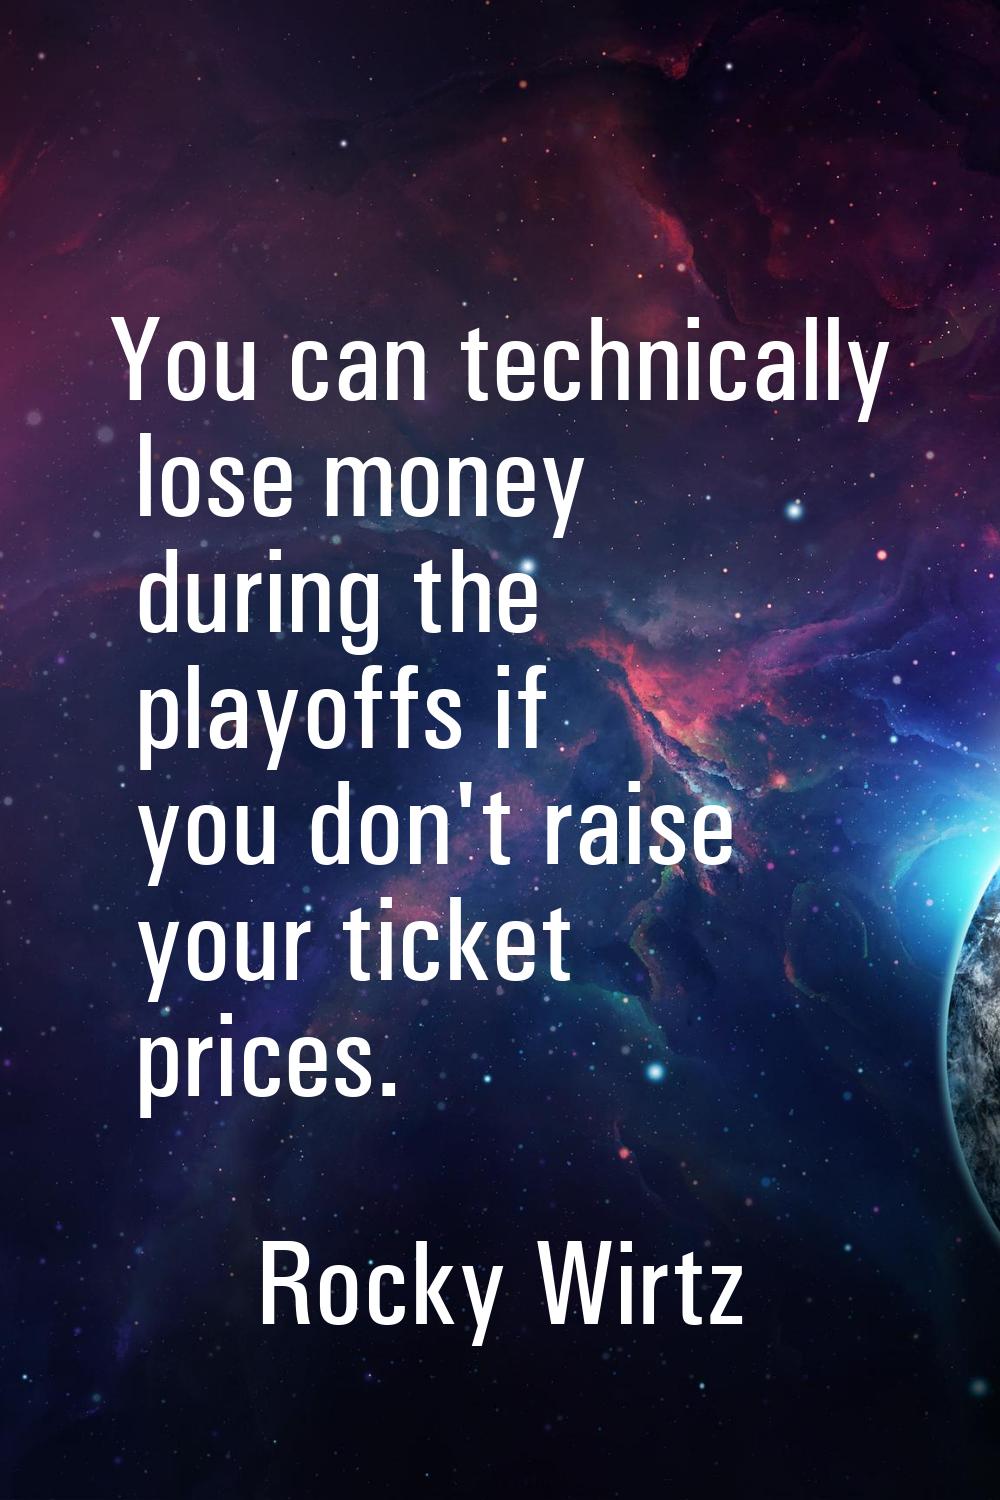 You can technically lose money during the playoffs if you don't raise your ticket prices.